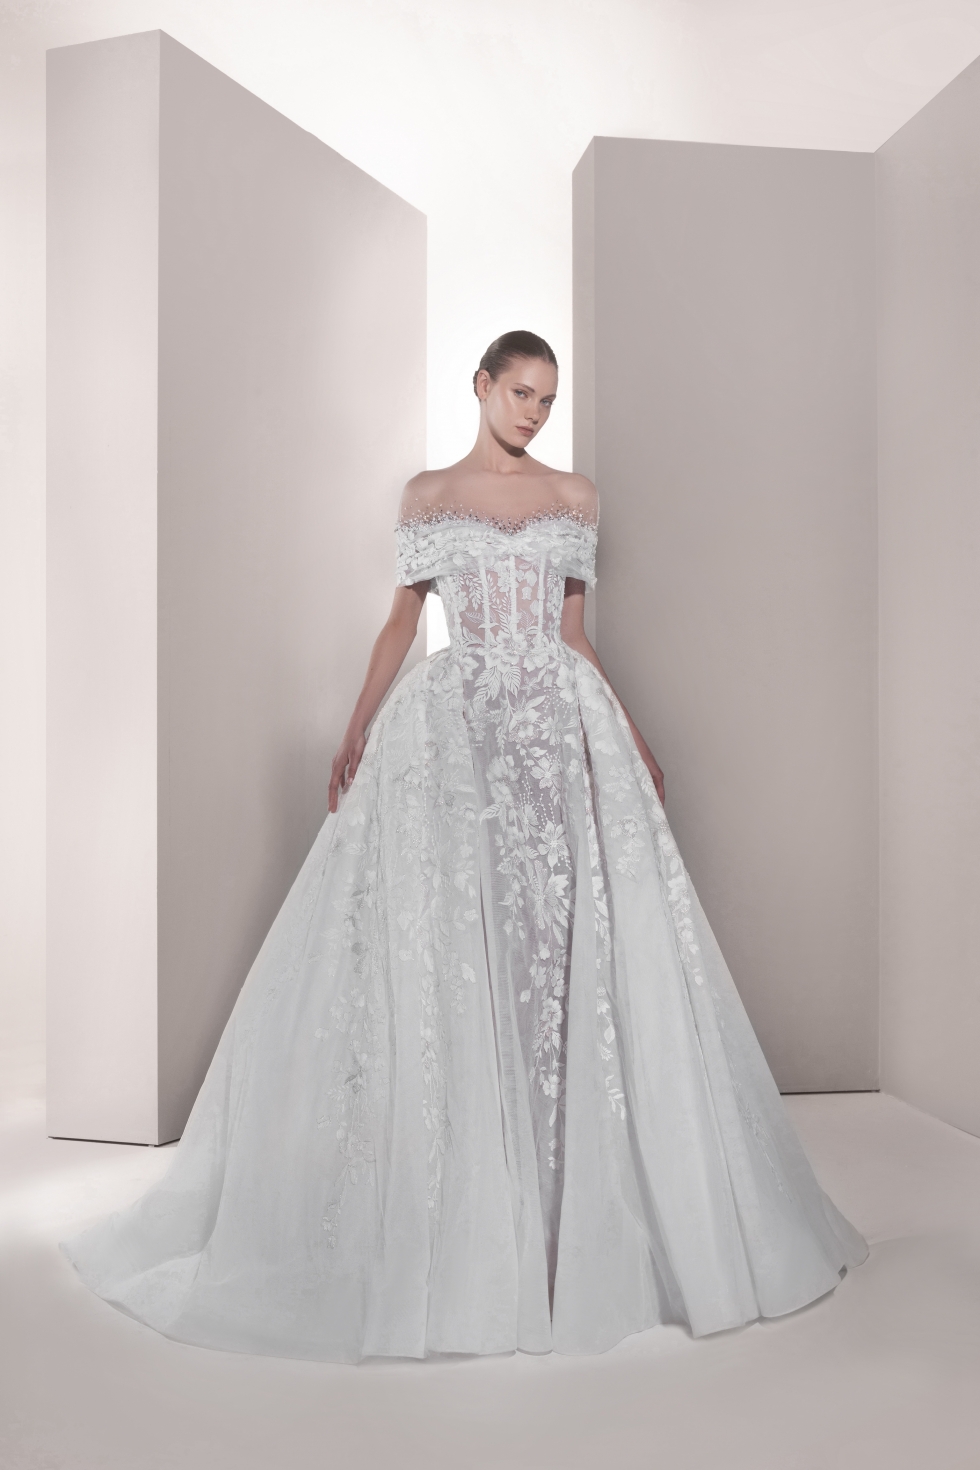 The Pollen Dance 2025 Bridal Collection by Tony Ward